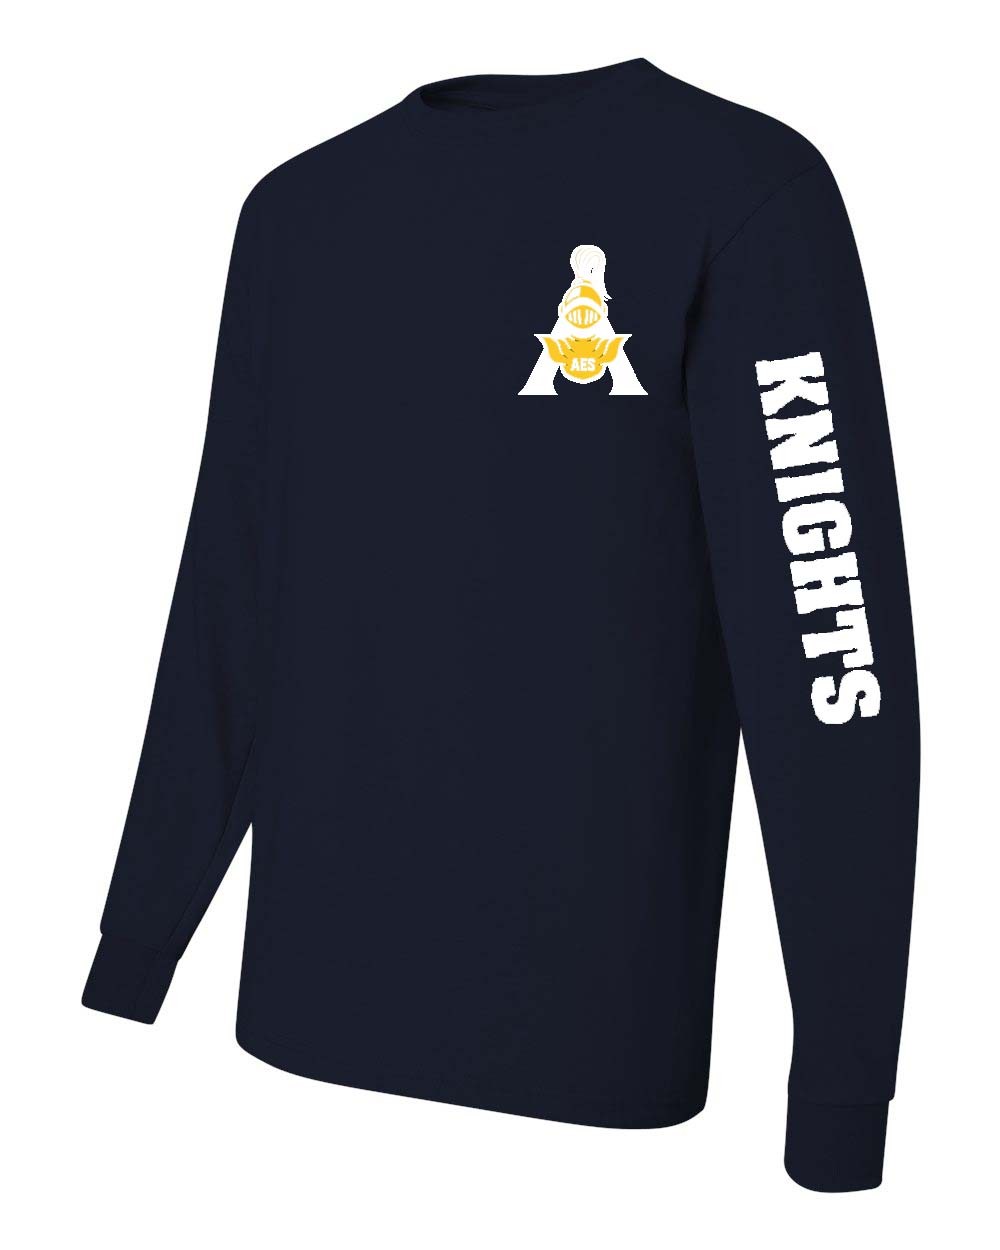 ANN Spirit L/S T-Shirt w/ AES Logo - Please Allow 2-3 Weeks for Delivery